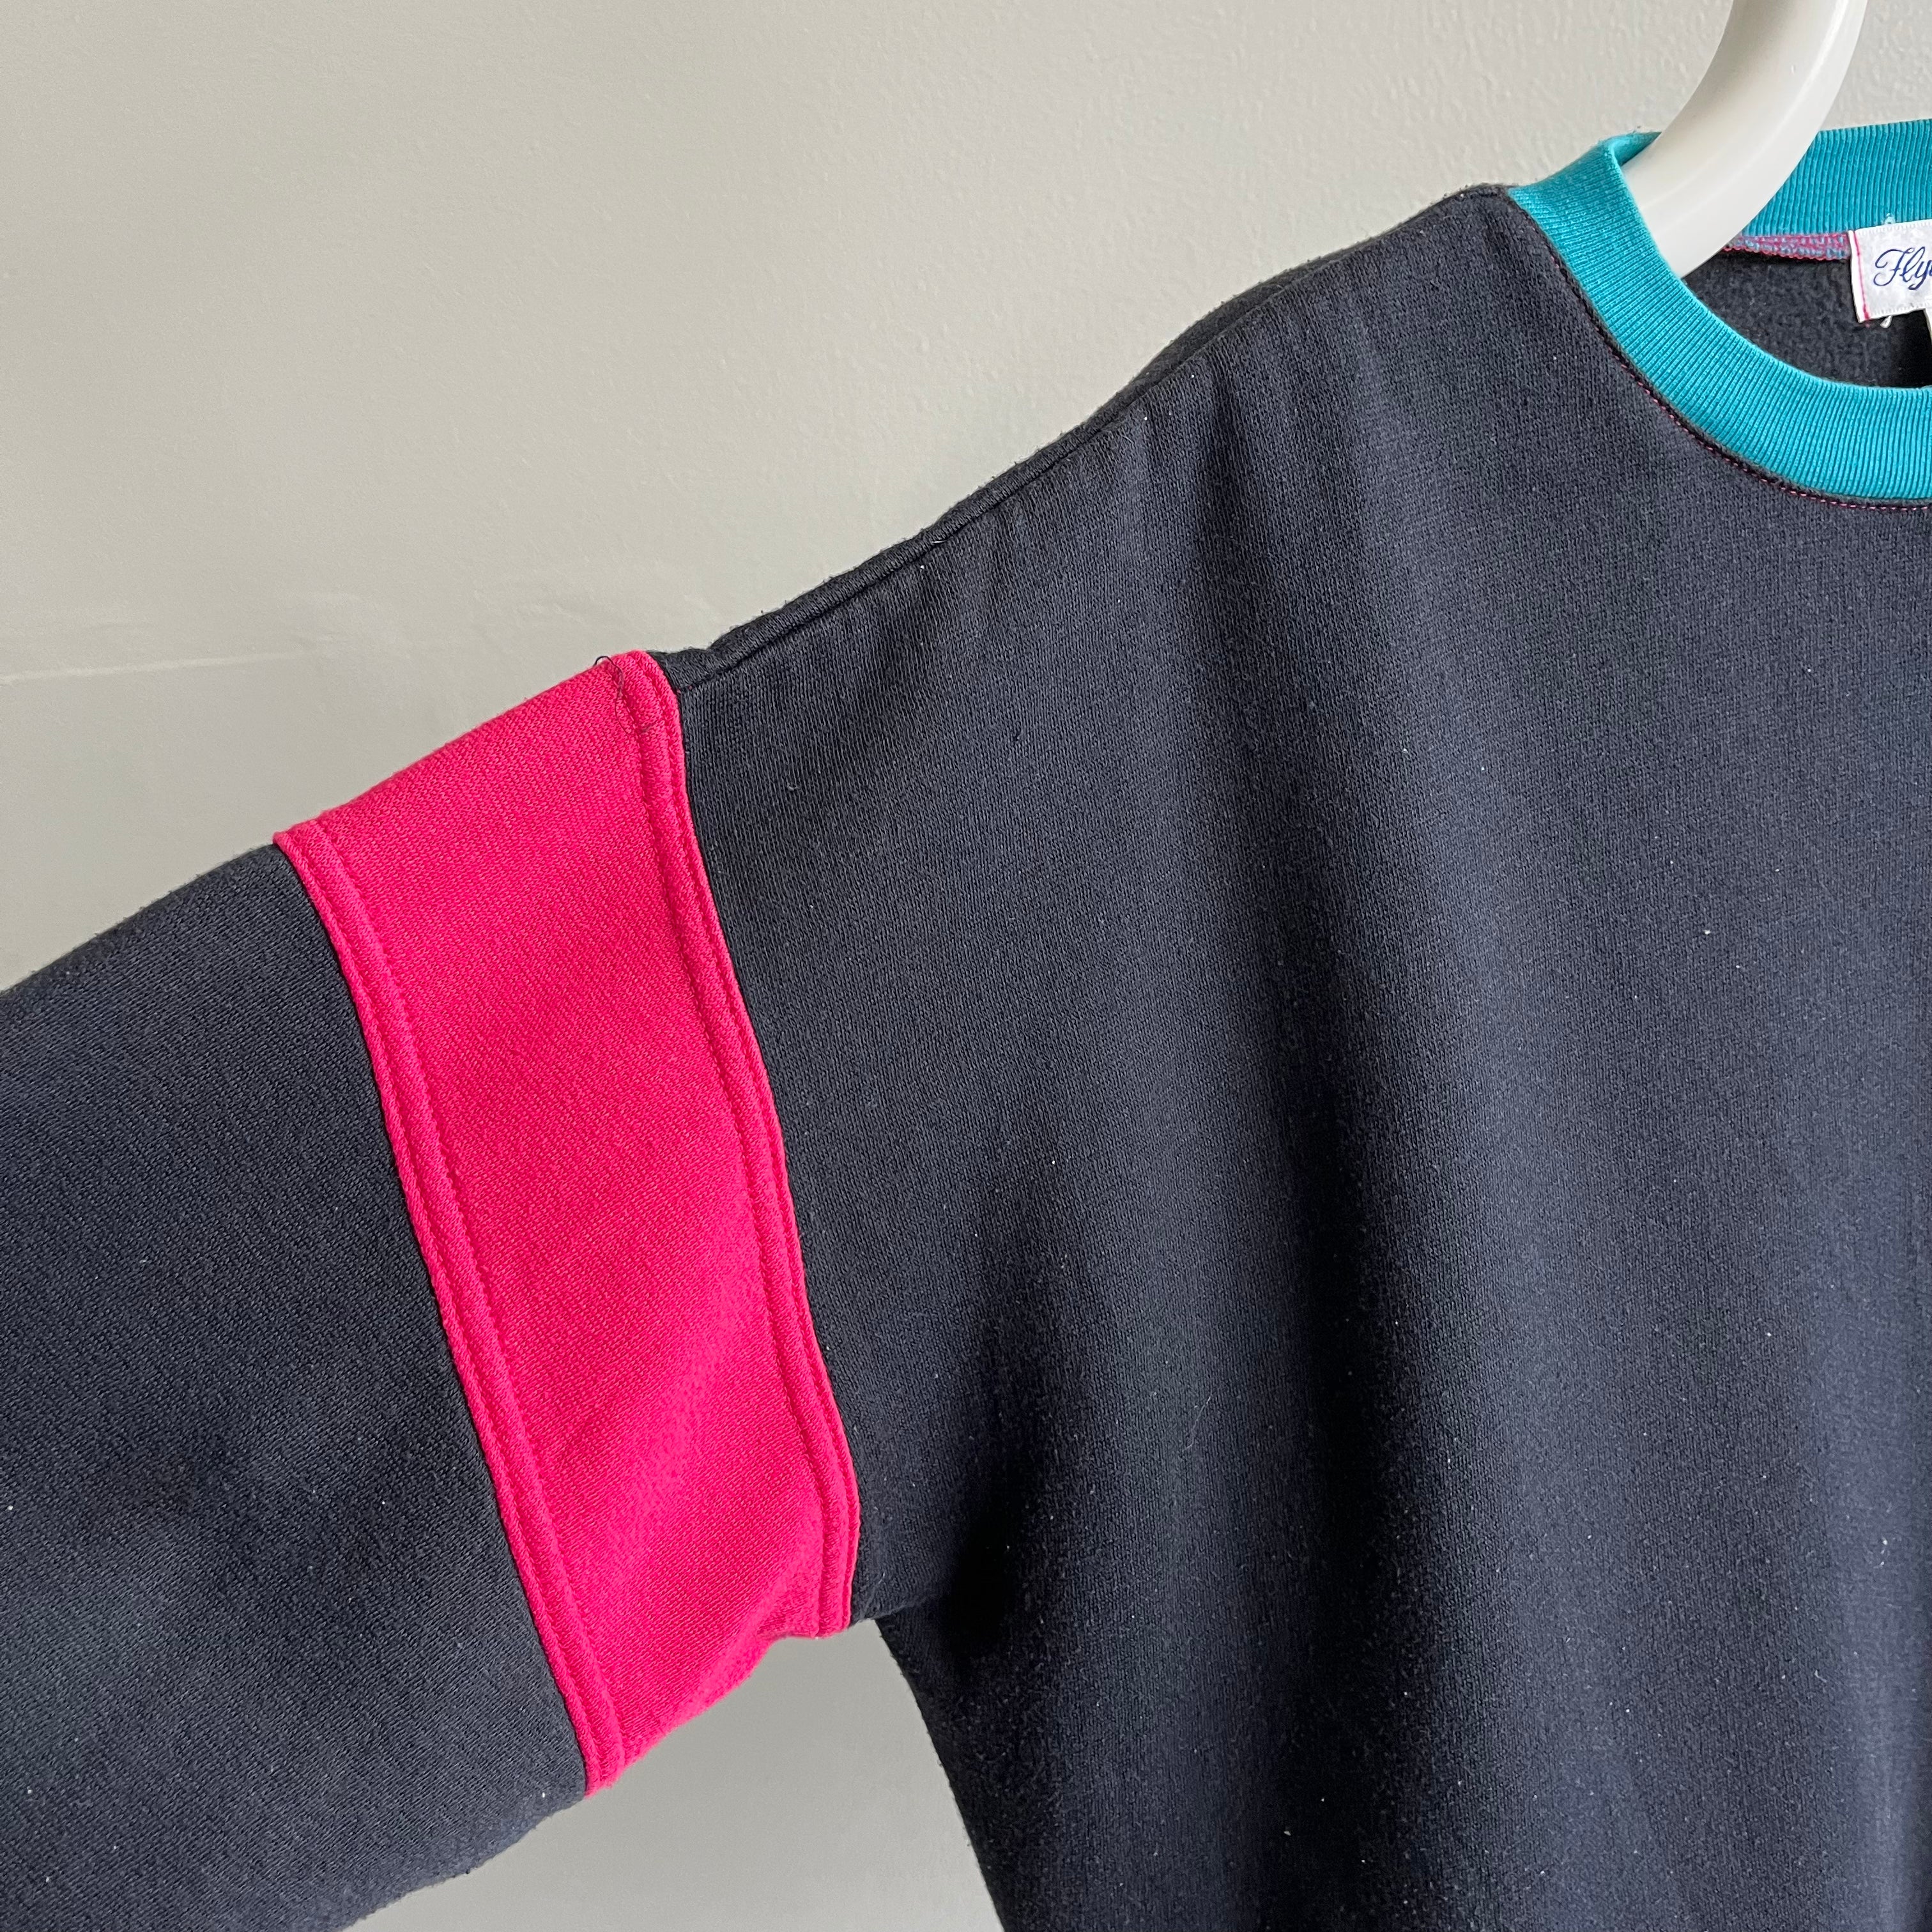 1980s RAD!!!!!! Color Block Sweatshirt with Pockets and Elbow Patches